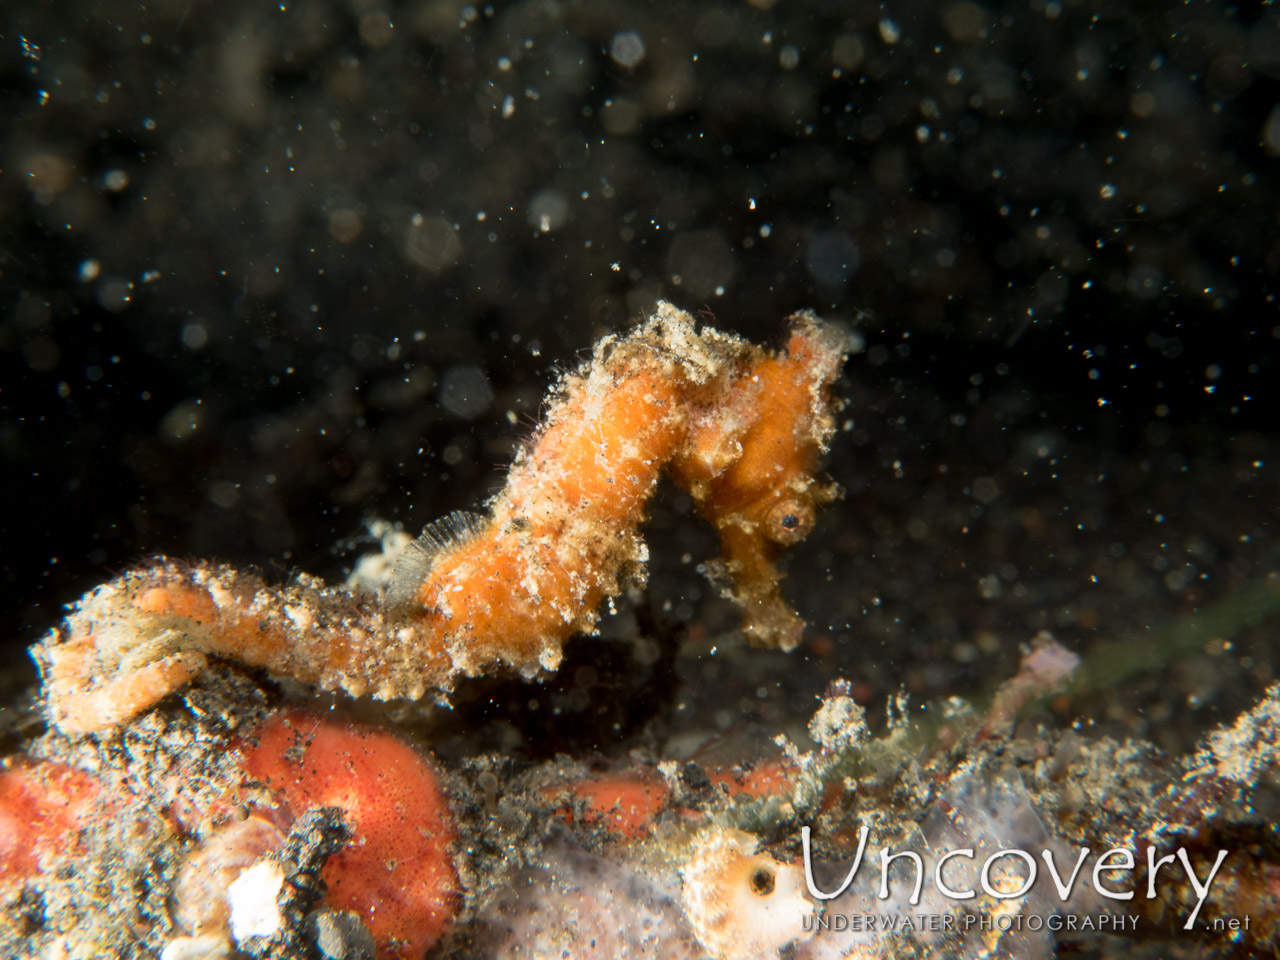 Common Sea Horse (hippocampus Kuda), photo taken in Indonesia, North Sulawesi, Lembeh Strait, Hairball